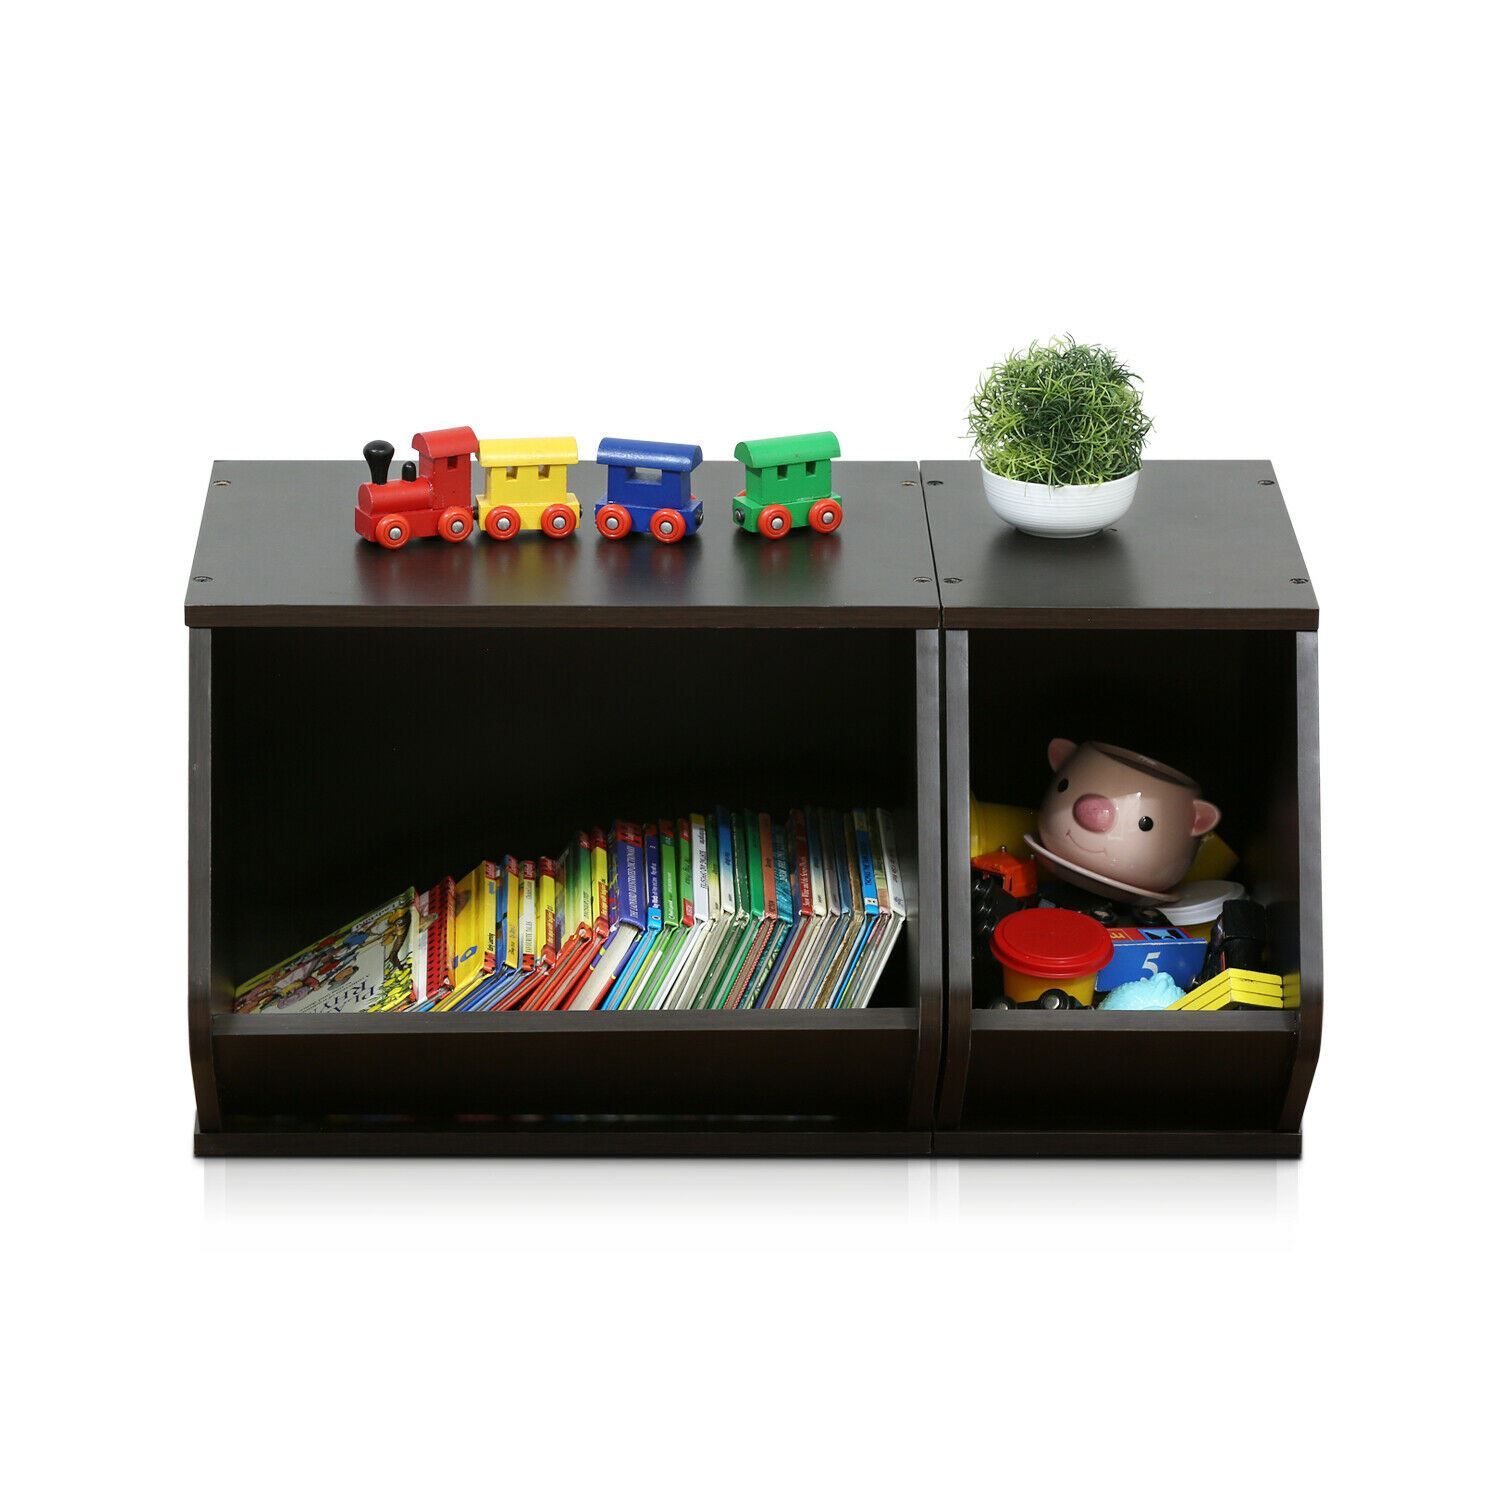 - Furinno KidKanac Stacking Storage Set features unique and durable structure.
- The set comes with 2 or 3 storage boxes in different sizes. 
- You can use them alone or stacked together to create your own ideal storage space. 
- This storage set is extremely suitable to use in kids rooms where there are a lot of loose toys and books.
- All the products are produced and assembled with 95% - 100% recycled materials. 
-Care instructions wipe clean with clean damped cloth. Avoid using harsh chemicals. Pictures are for illustration purpose. All decor items are not included in this offer.